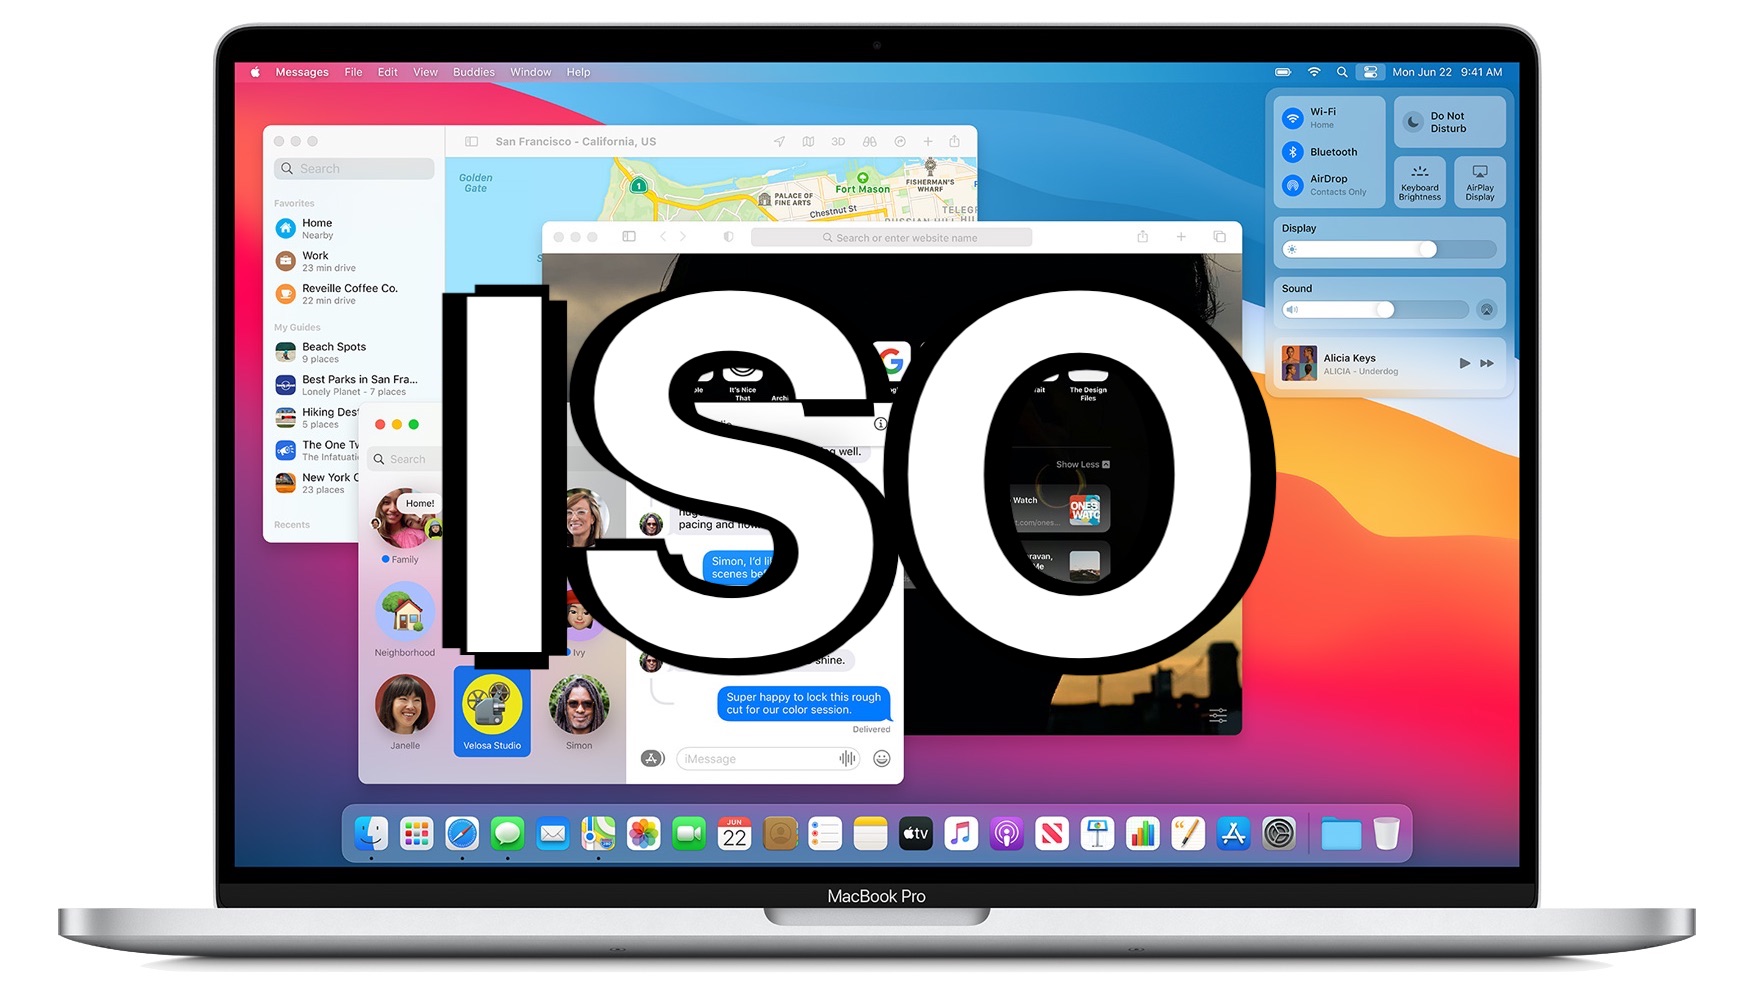 How to Make a MacOS Big Sur ISO File